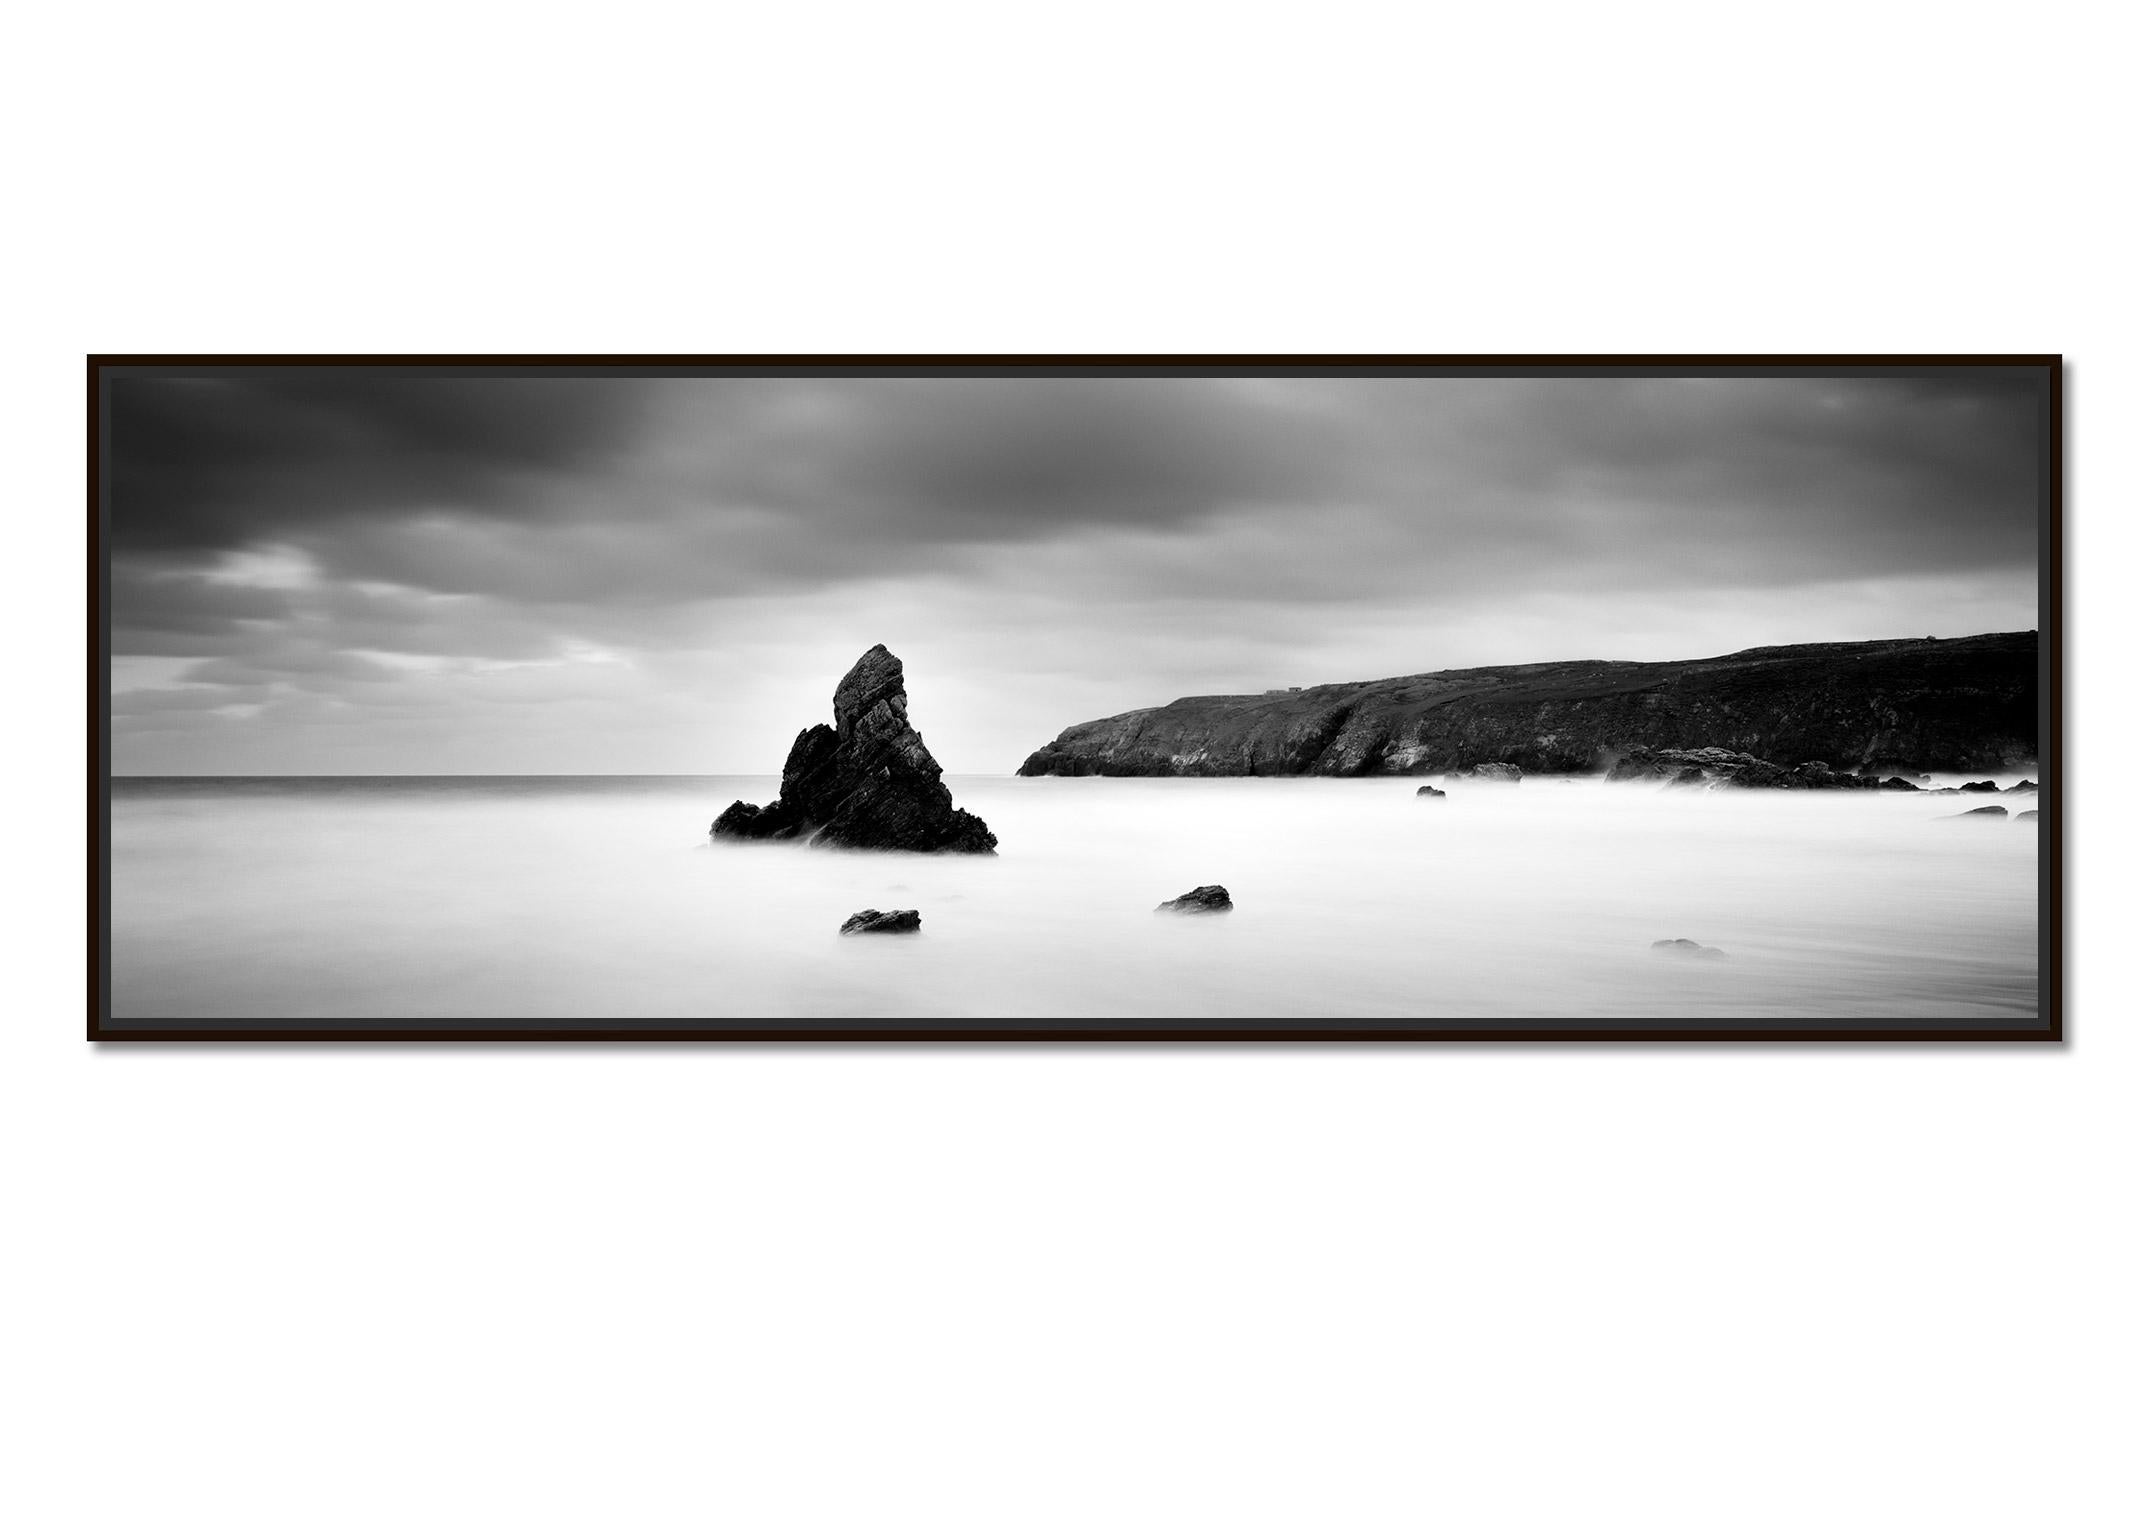 Sea Stack Panorama, shoreline, Scotland, black and white landscape photography - Photograph by Gerald Berghammer